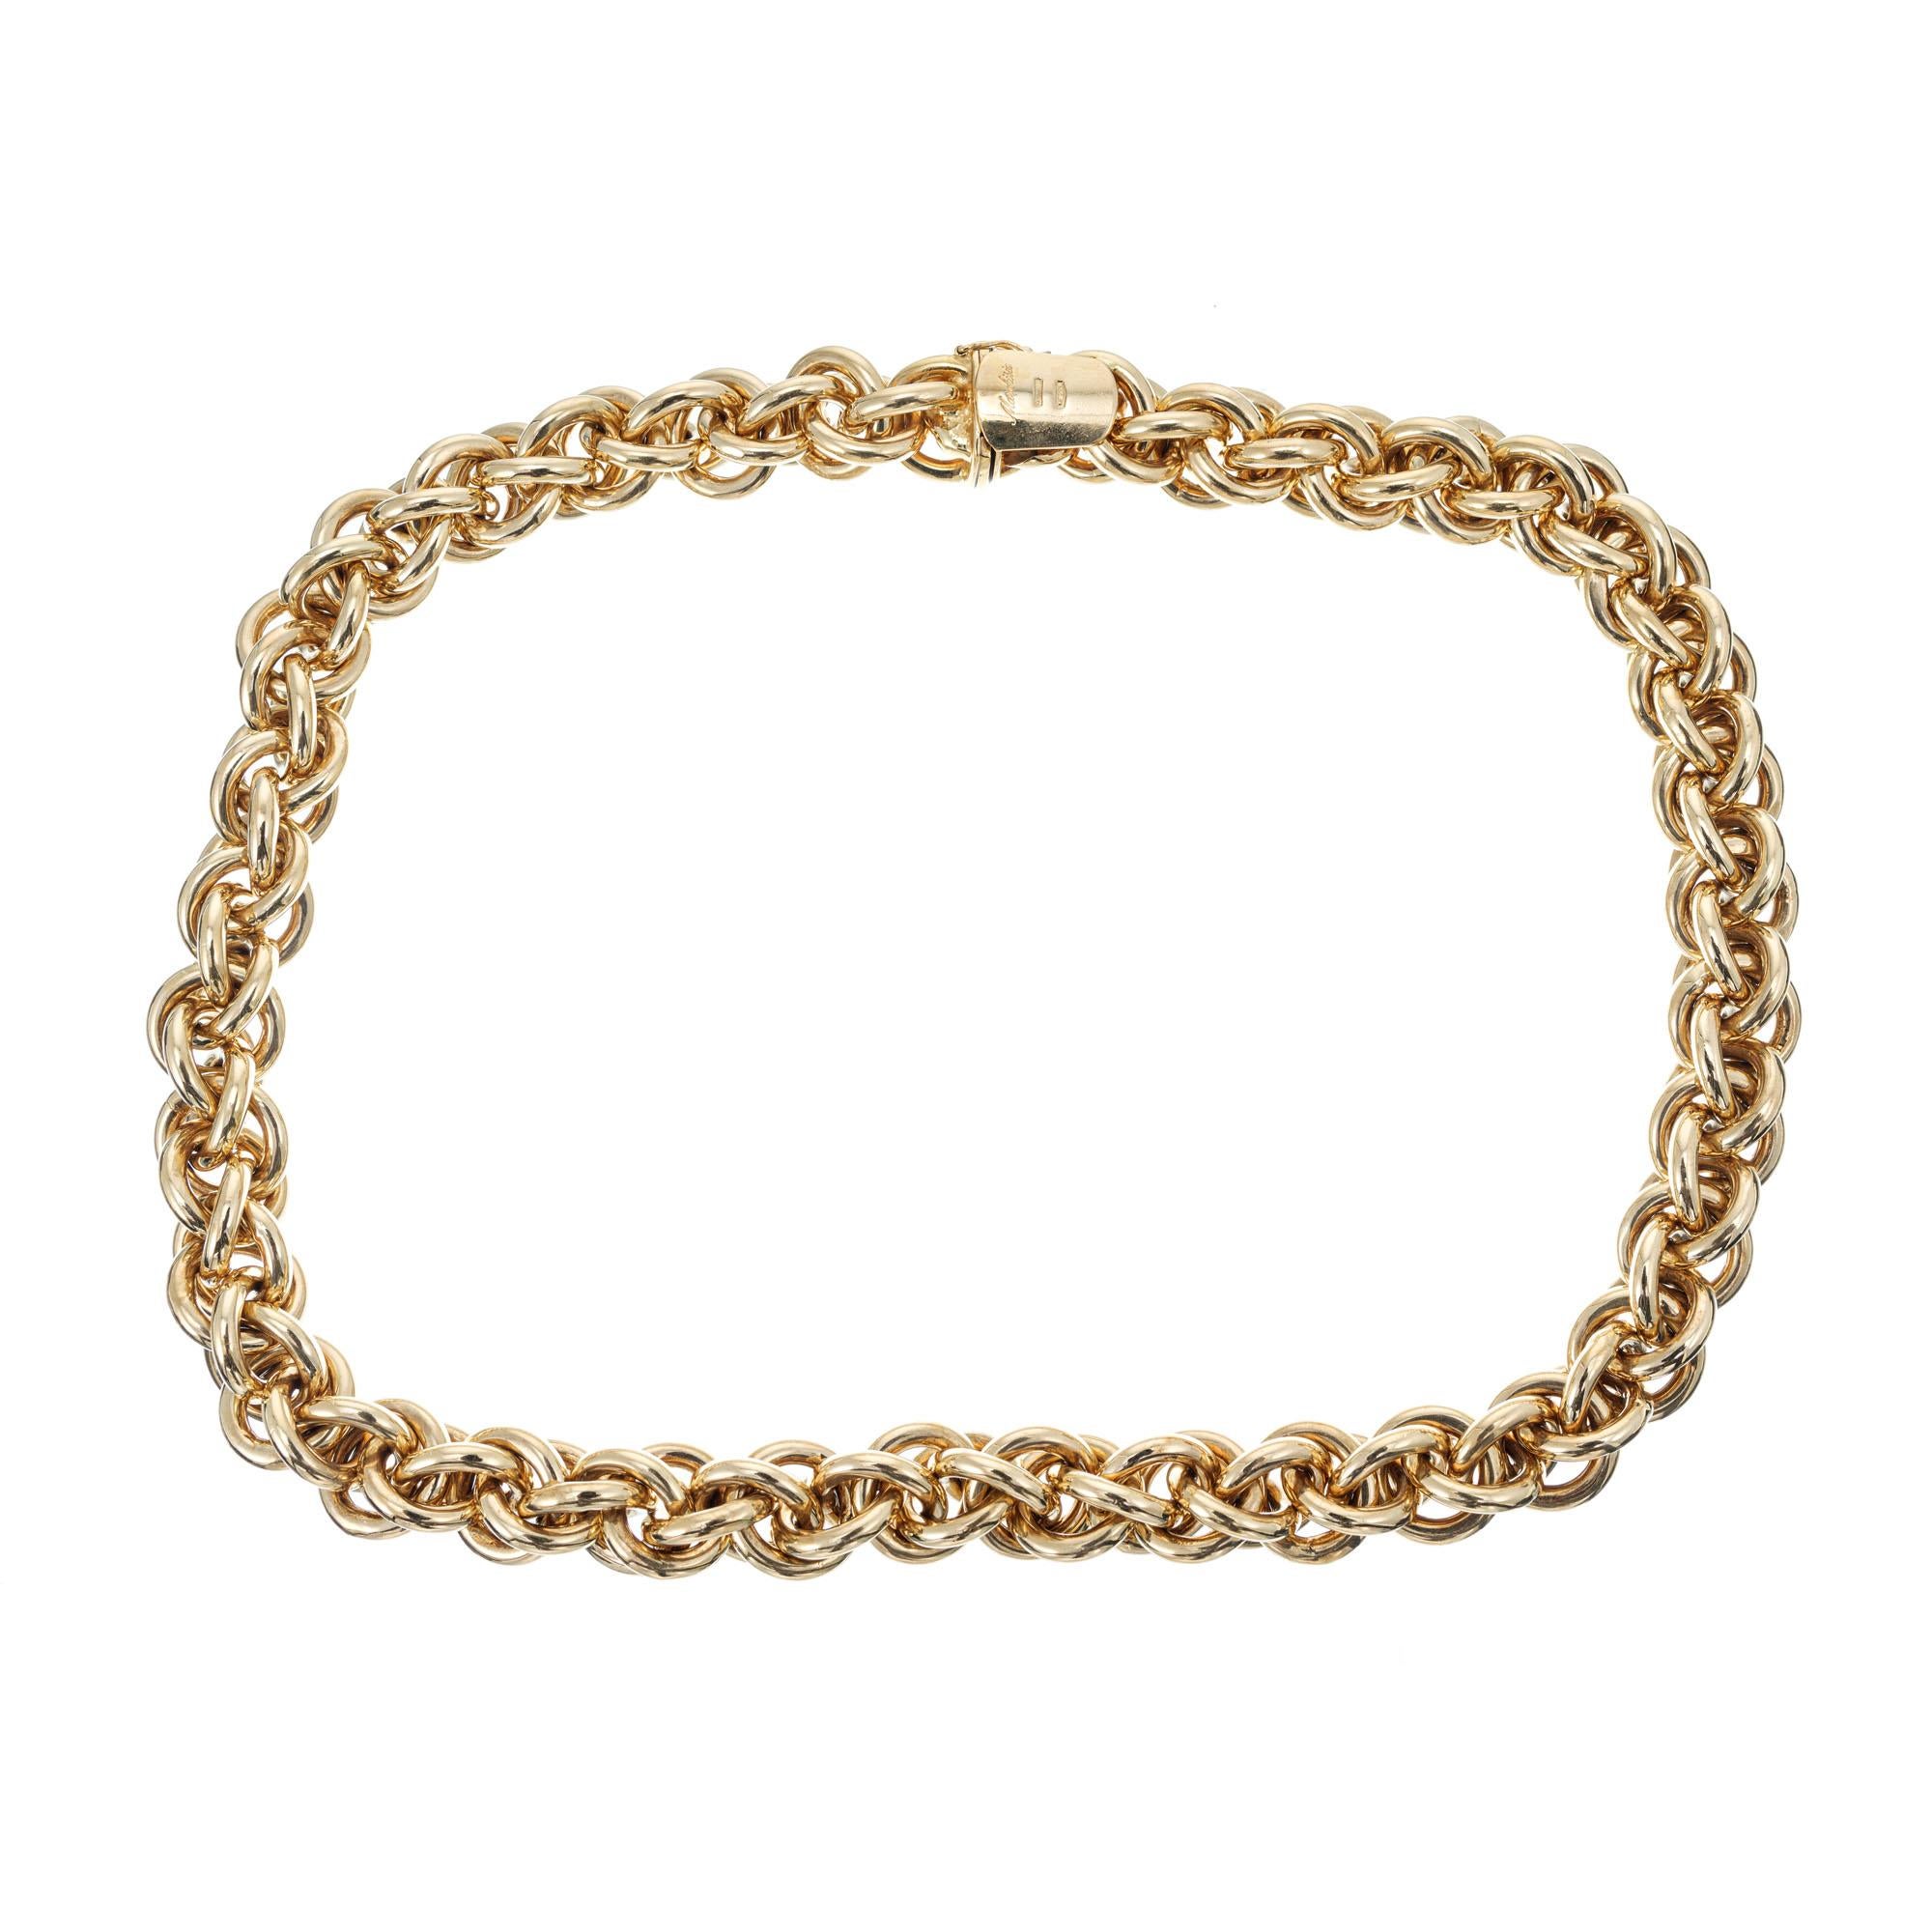 Giovanni Marchisio Heavy yellow gold link necklace. Hollow links. 13.5mm wide from Giovanni + Marchisio & Co. Italian factory. Circa 1960. 18 inches. 

18k yellow gold
Tested: 18k
135.3 grams
Stamped: 750
Hallmark: Marchisio
Total Length: 18